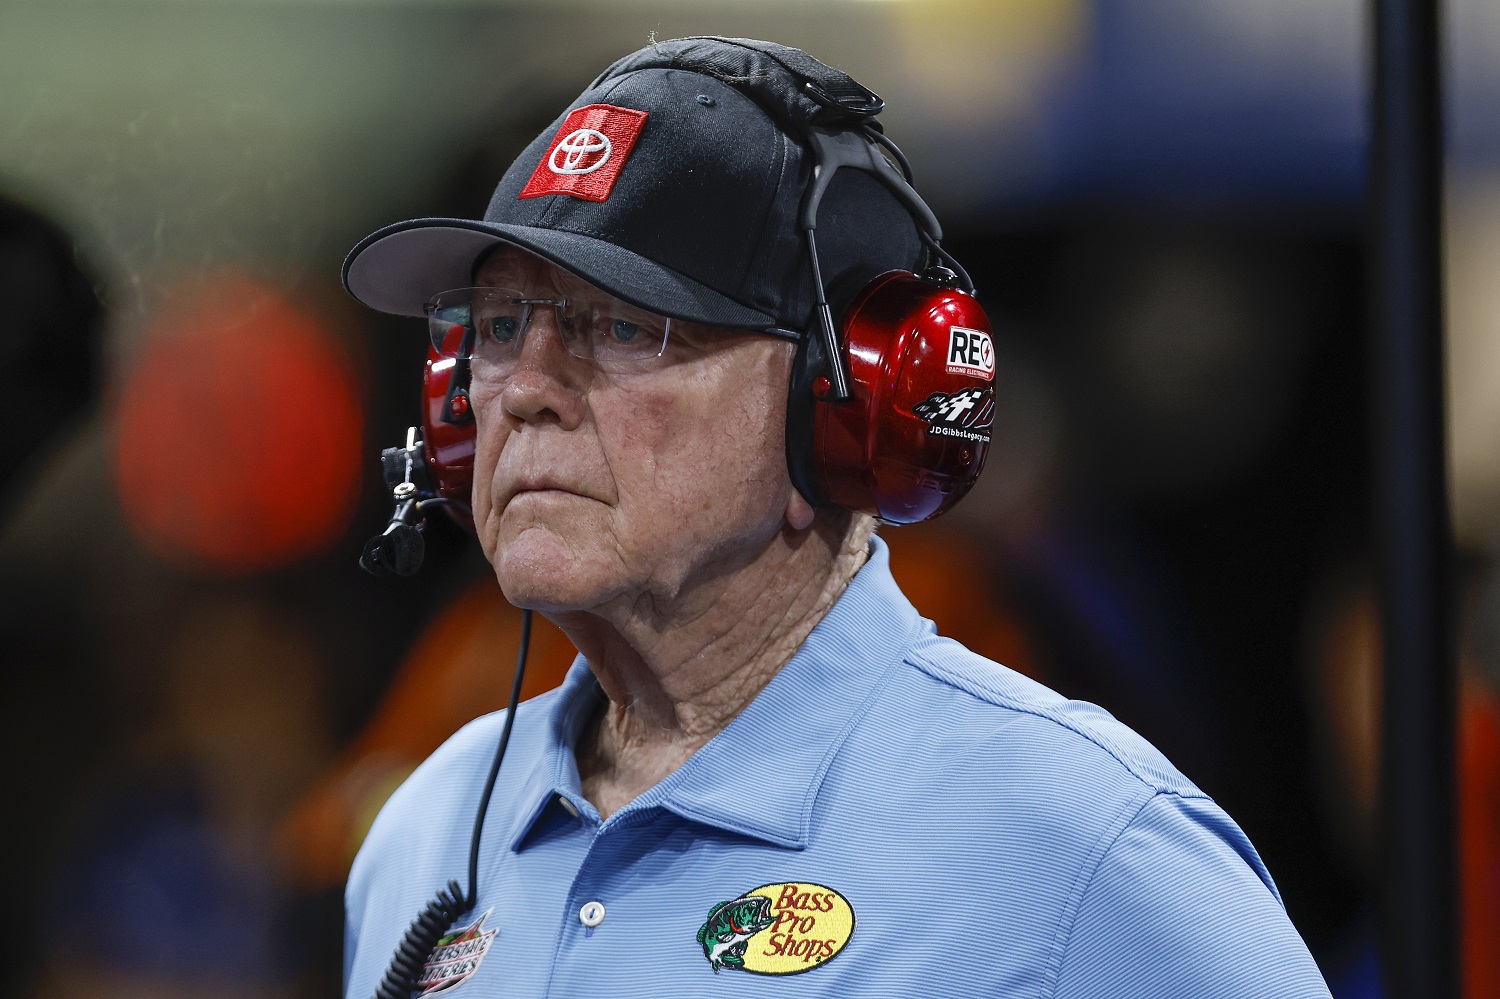 JGR owner and NASCAR Hall of Famer Joe Gibbs looks on during the Cup Series Auto Trader EchoPark Automotive 500 at Texas Motor Speedway on Sept. 25, 2022. | Tim Heitman/Getty Images